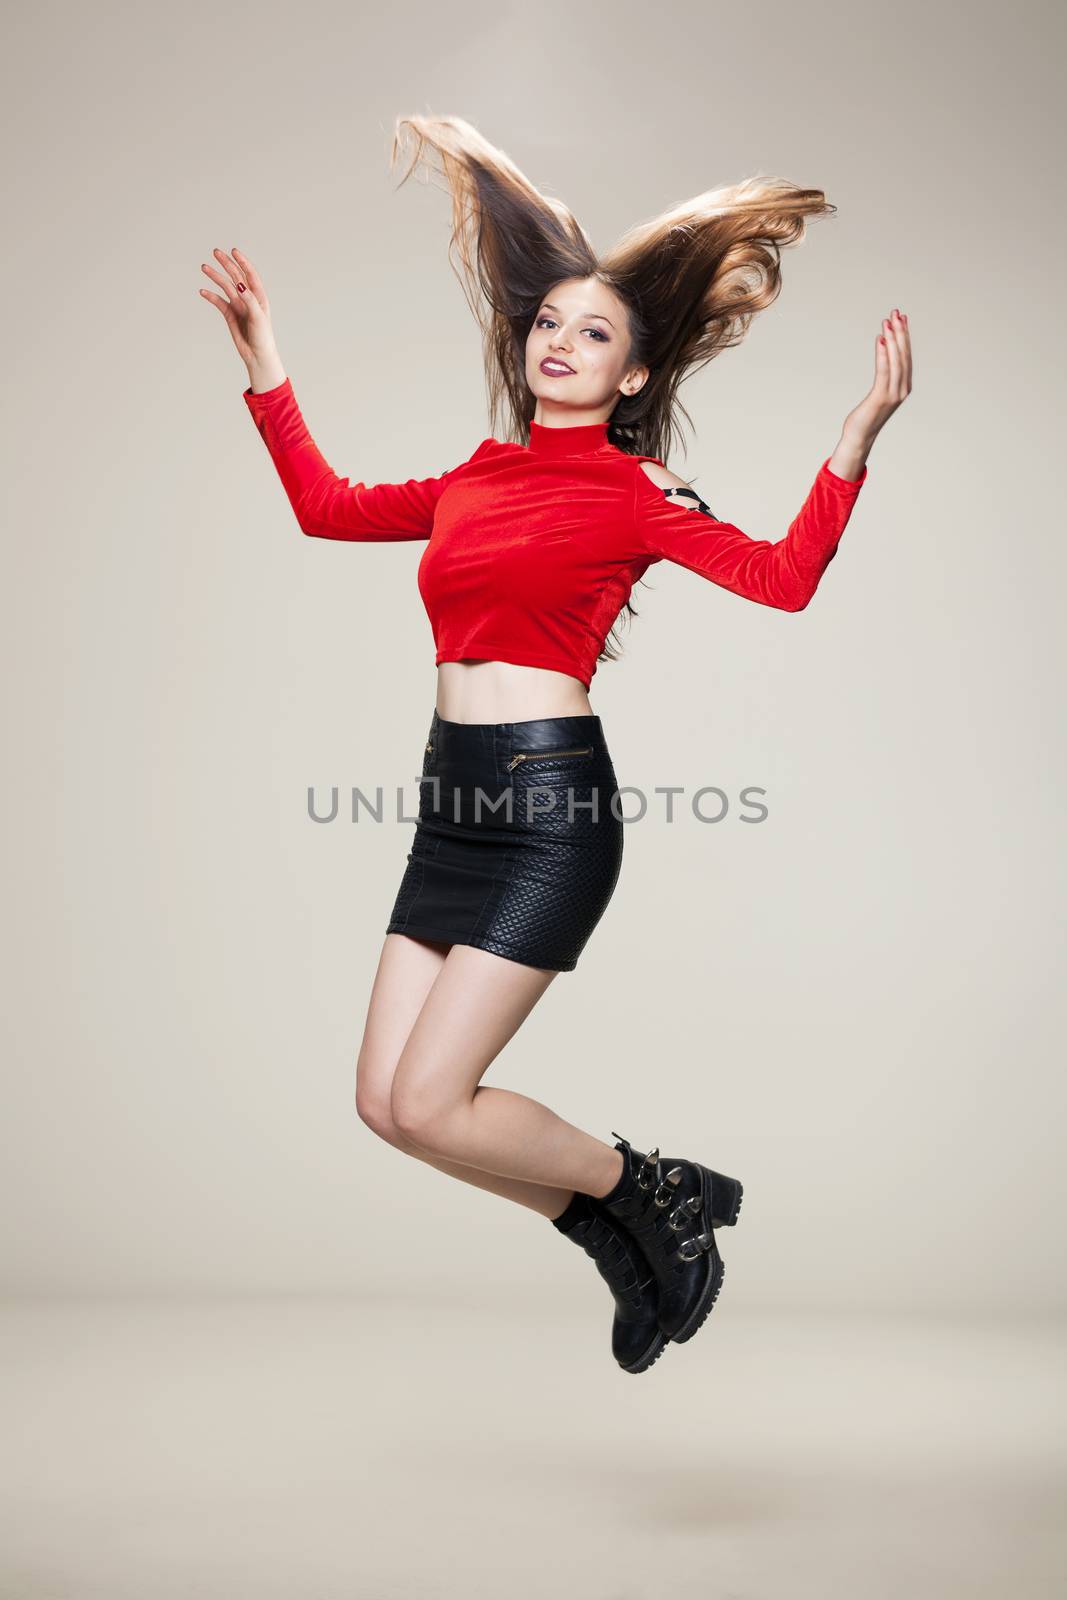 jumping girl in red shirt, short black dress and boots